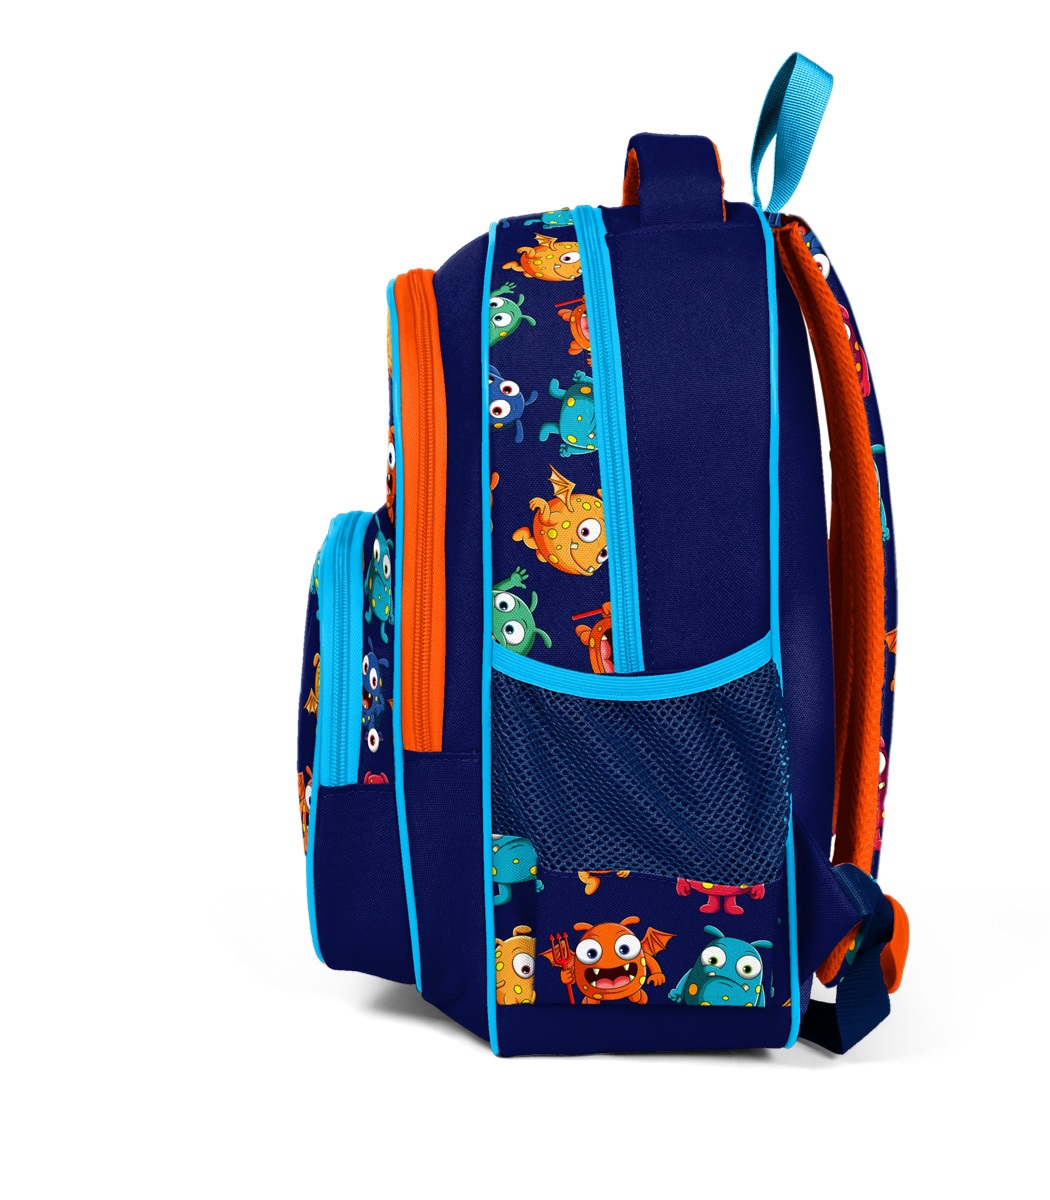 Coral High Kids Three Compartment School Backpack - Navy Blue Monster Pattern